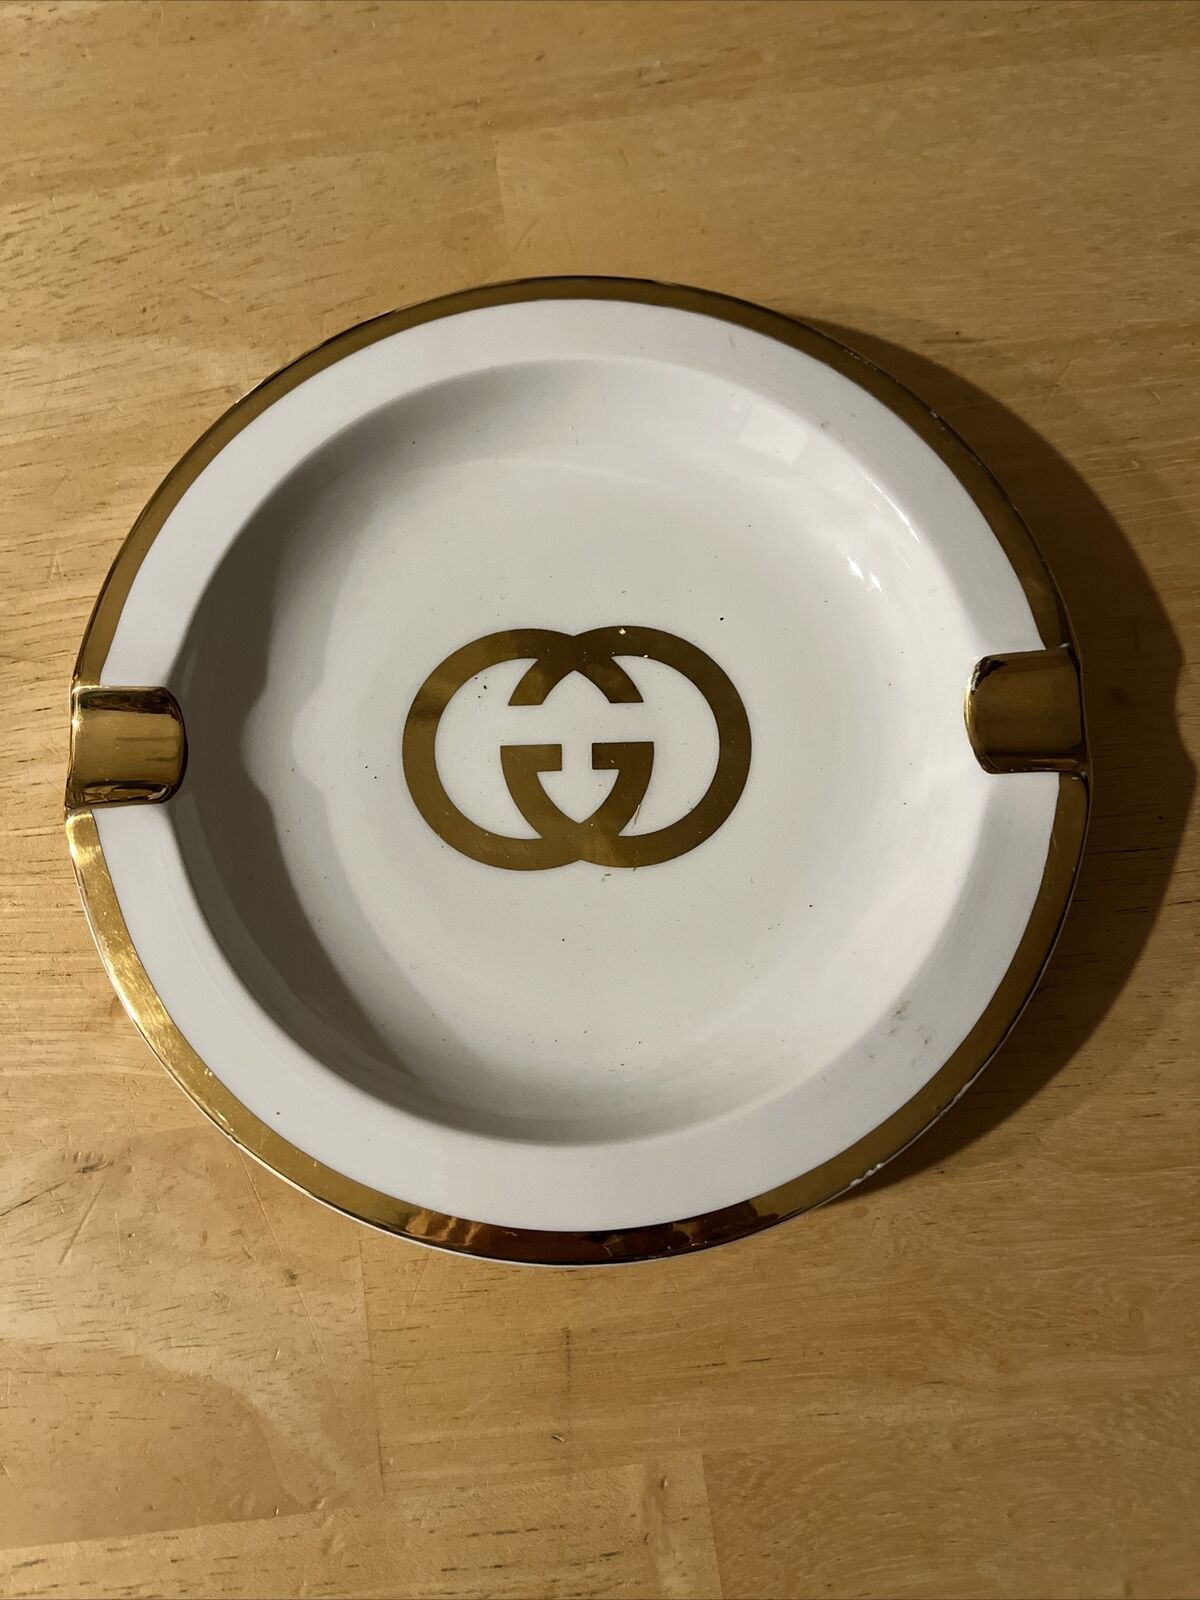 RARE GUCCI Ivory Ashtray with Iconic Gold Leaf Double GG Design Vintage 1970s